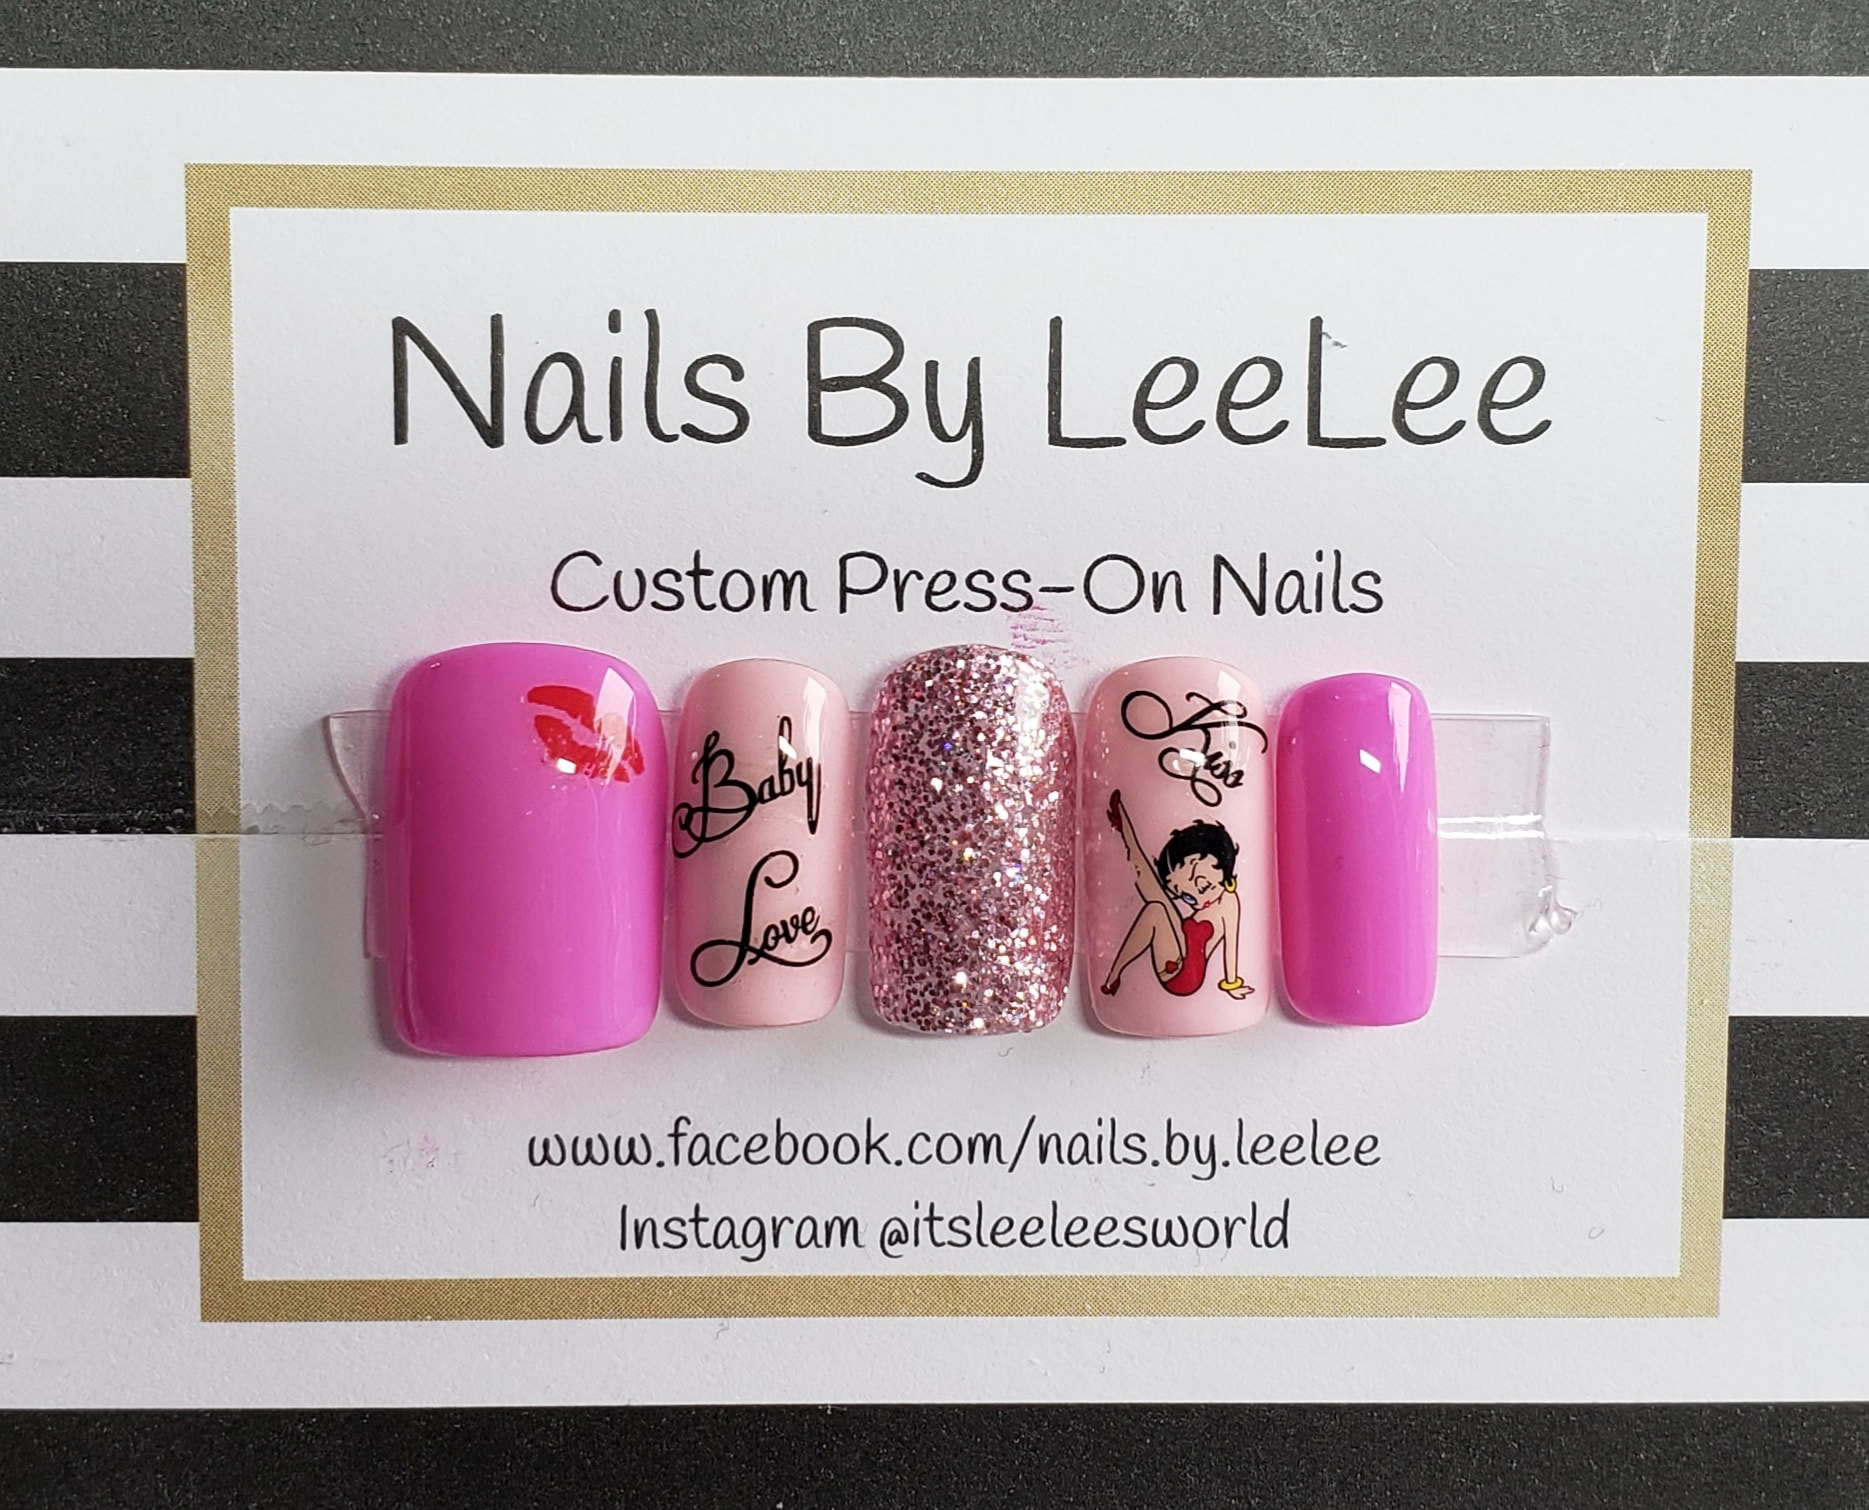 Baby Love Press-On Nails | Nails By LeeLee